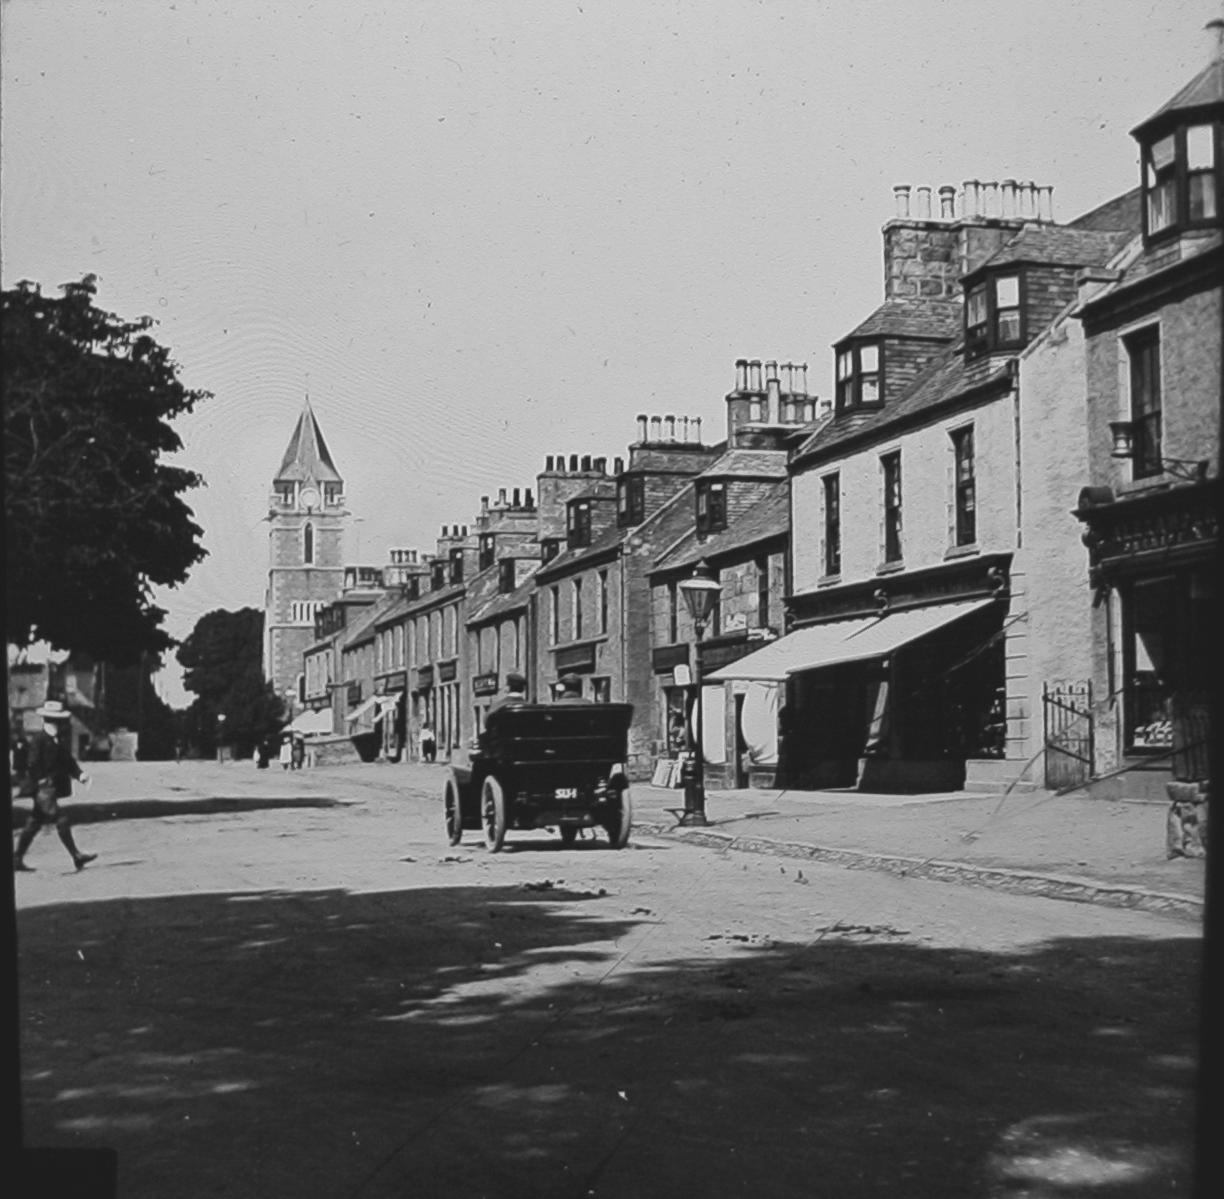 Banchory High Street Through the Ages VisitBanchory